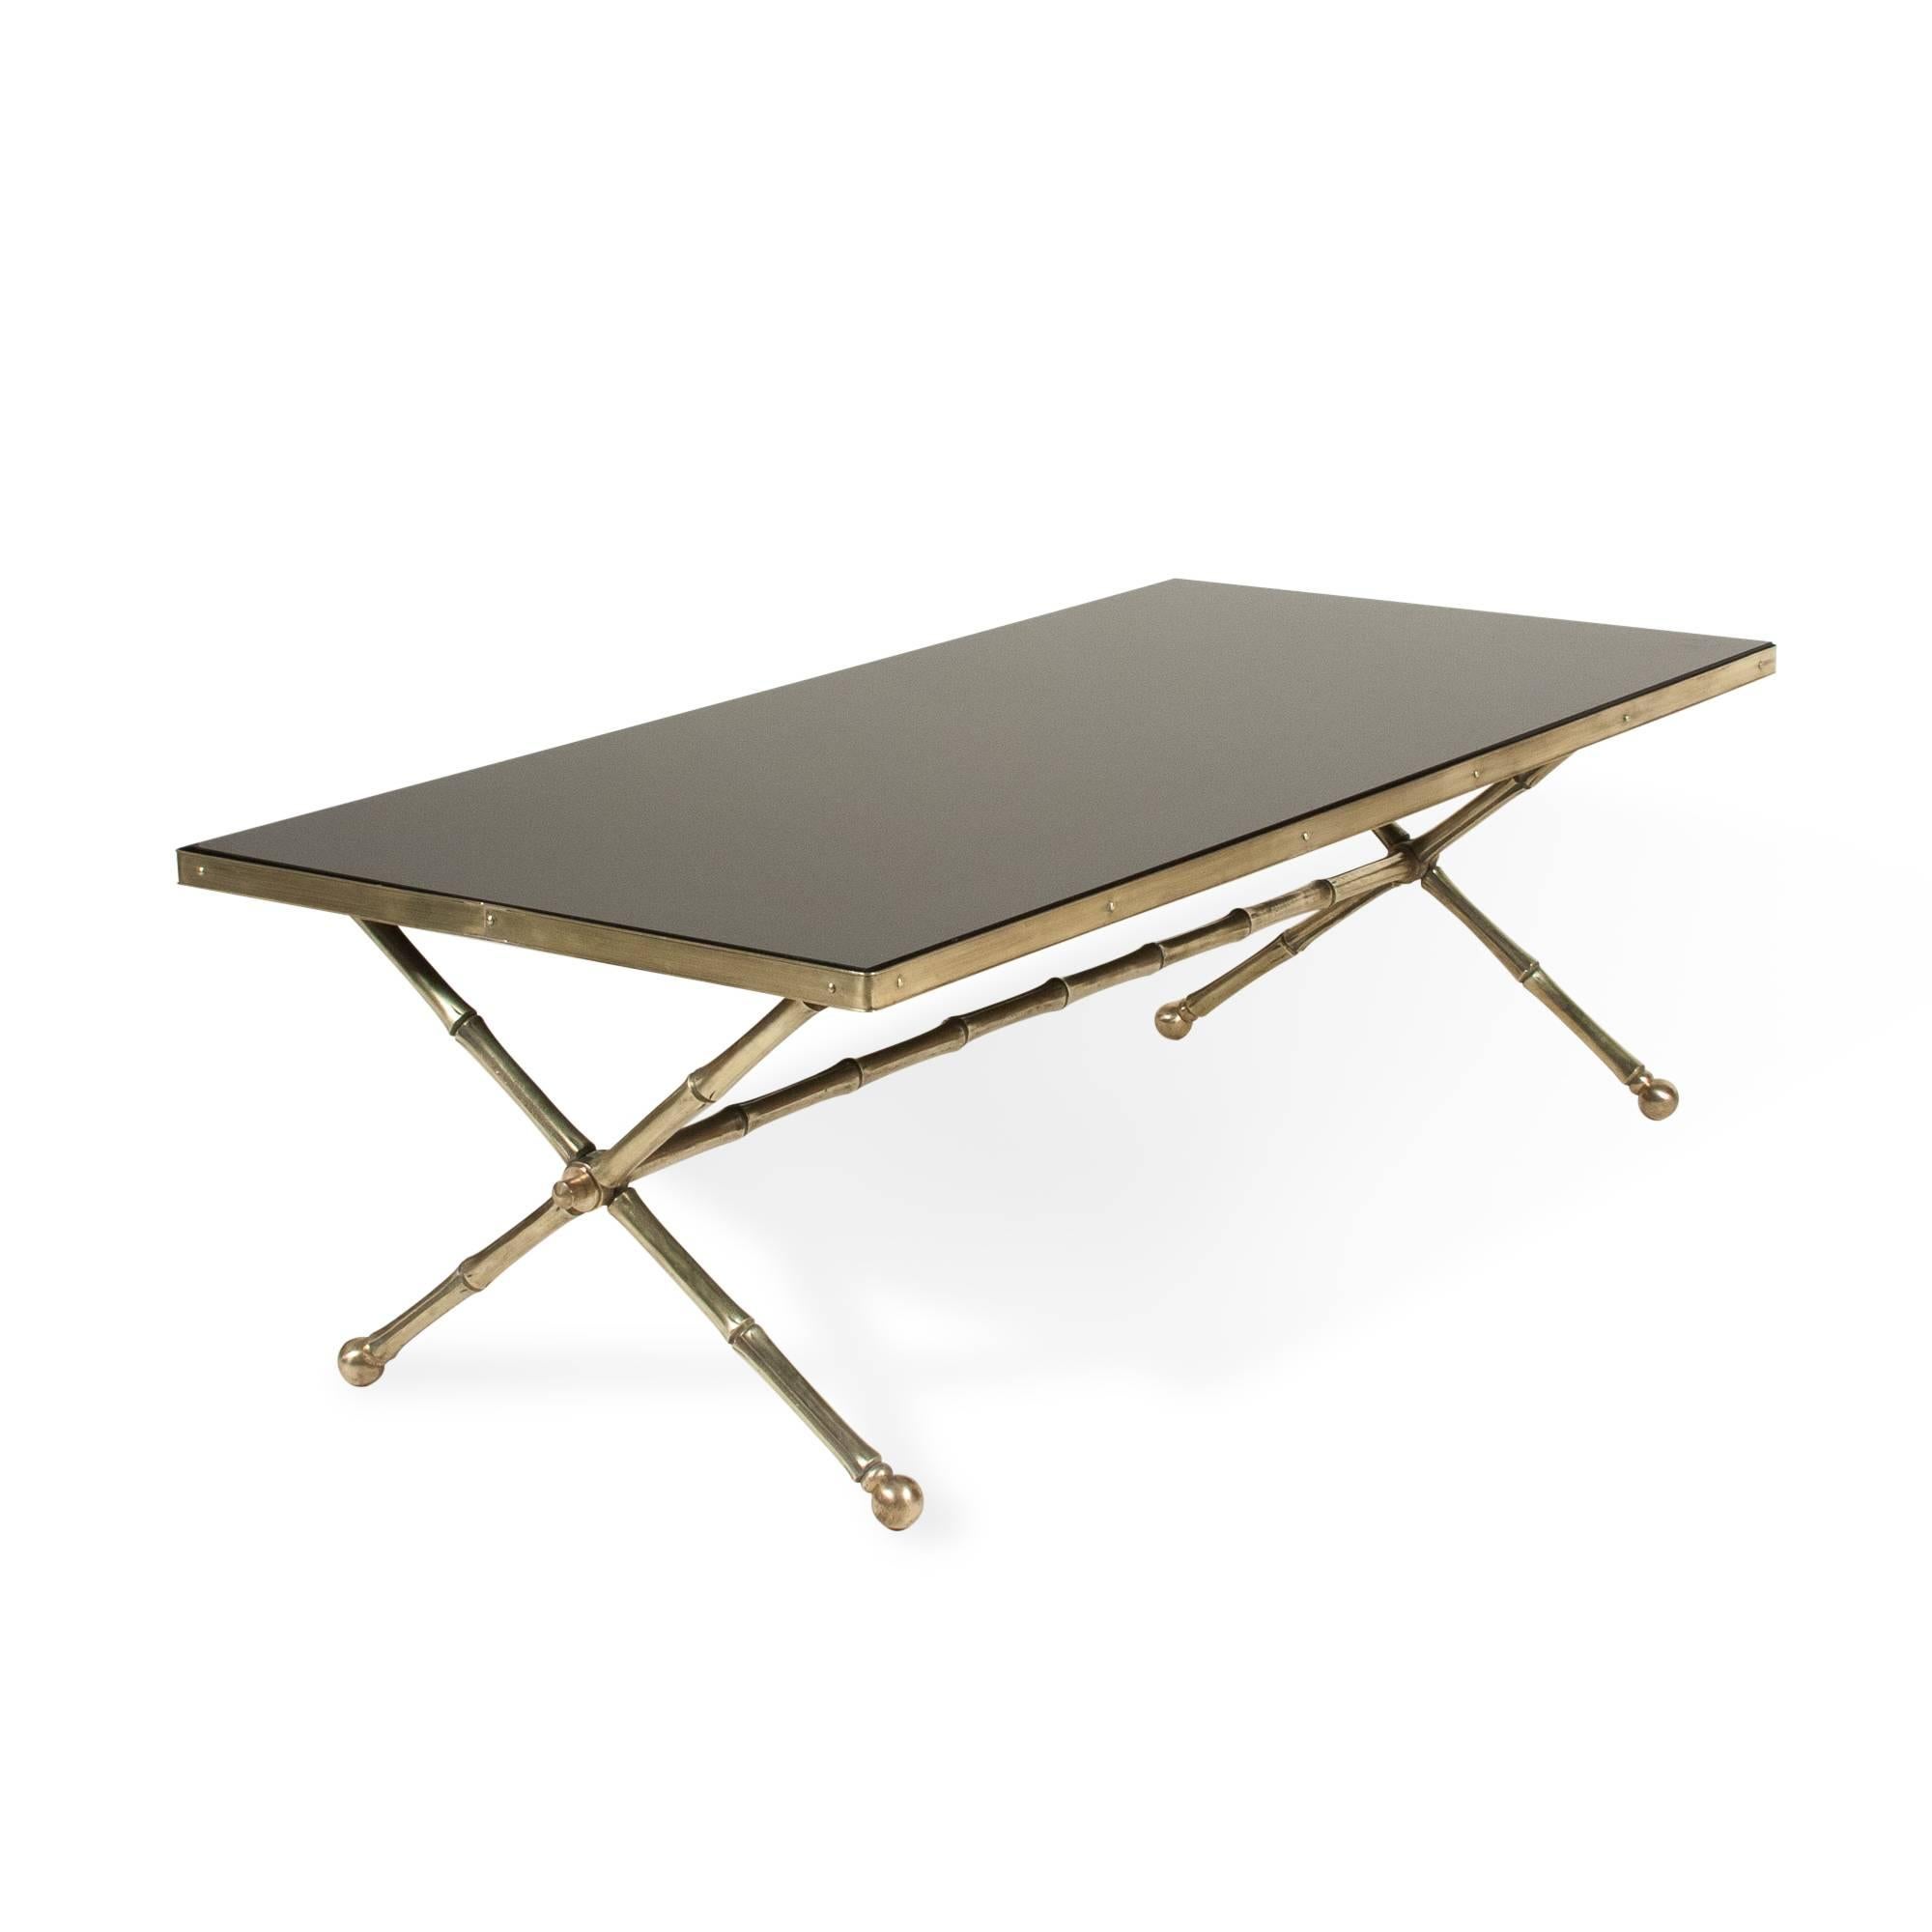 Rectangular black glass top coffee table, bronze faux bamboo frame, crossed legs at either end, with cross stretcher, French, 1960s. Measures: Length 40 in, width 19 1/2 in, height 13 in.
 